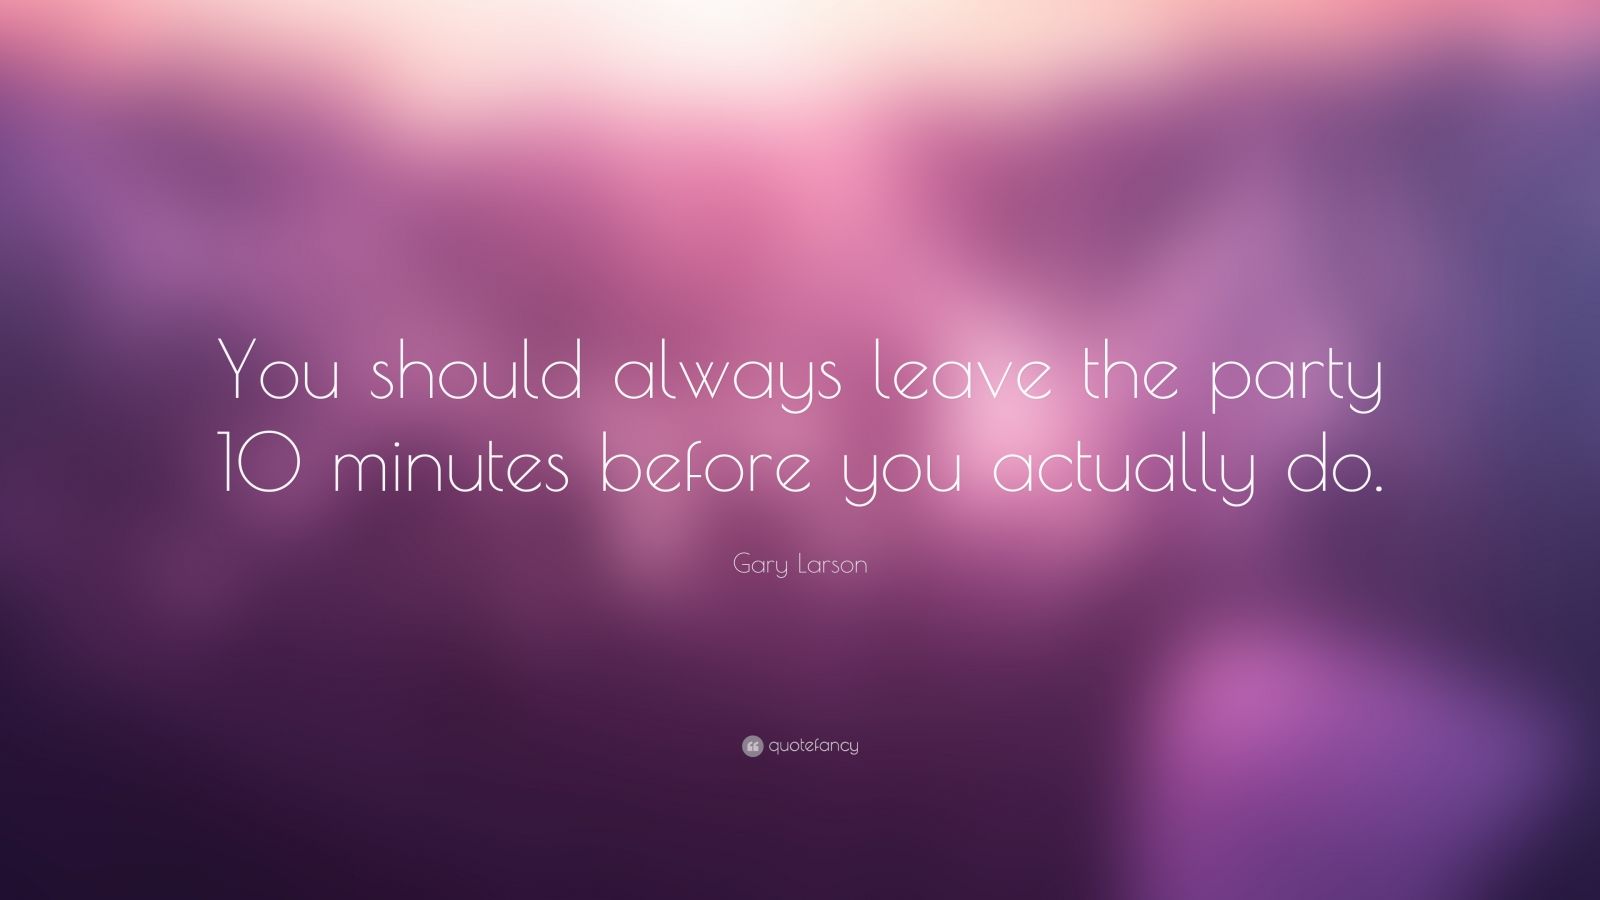 Gary Larson Quote: “You should always leave the party 10 minutes before ...